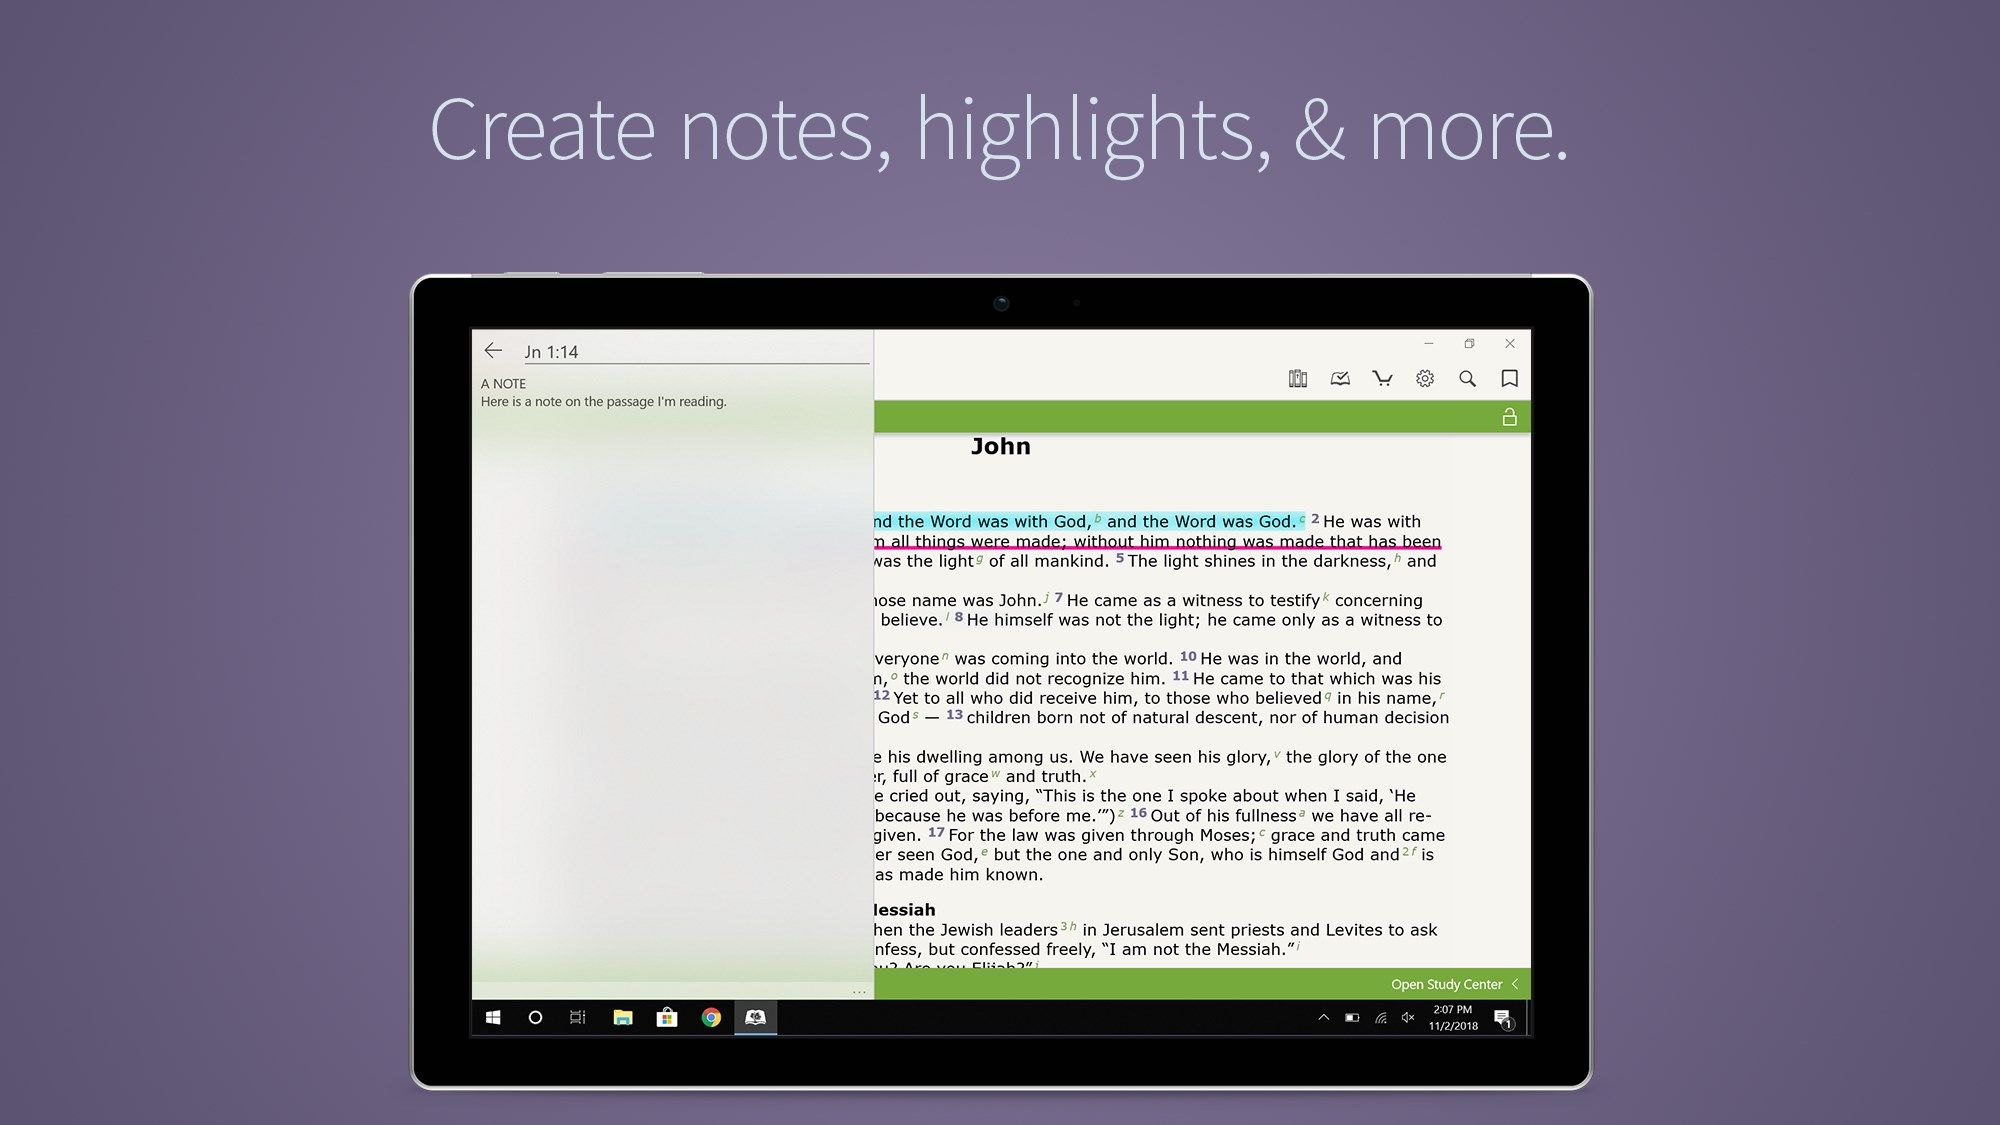 Create notes, highlights, & more.